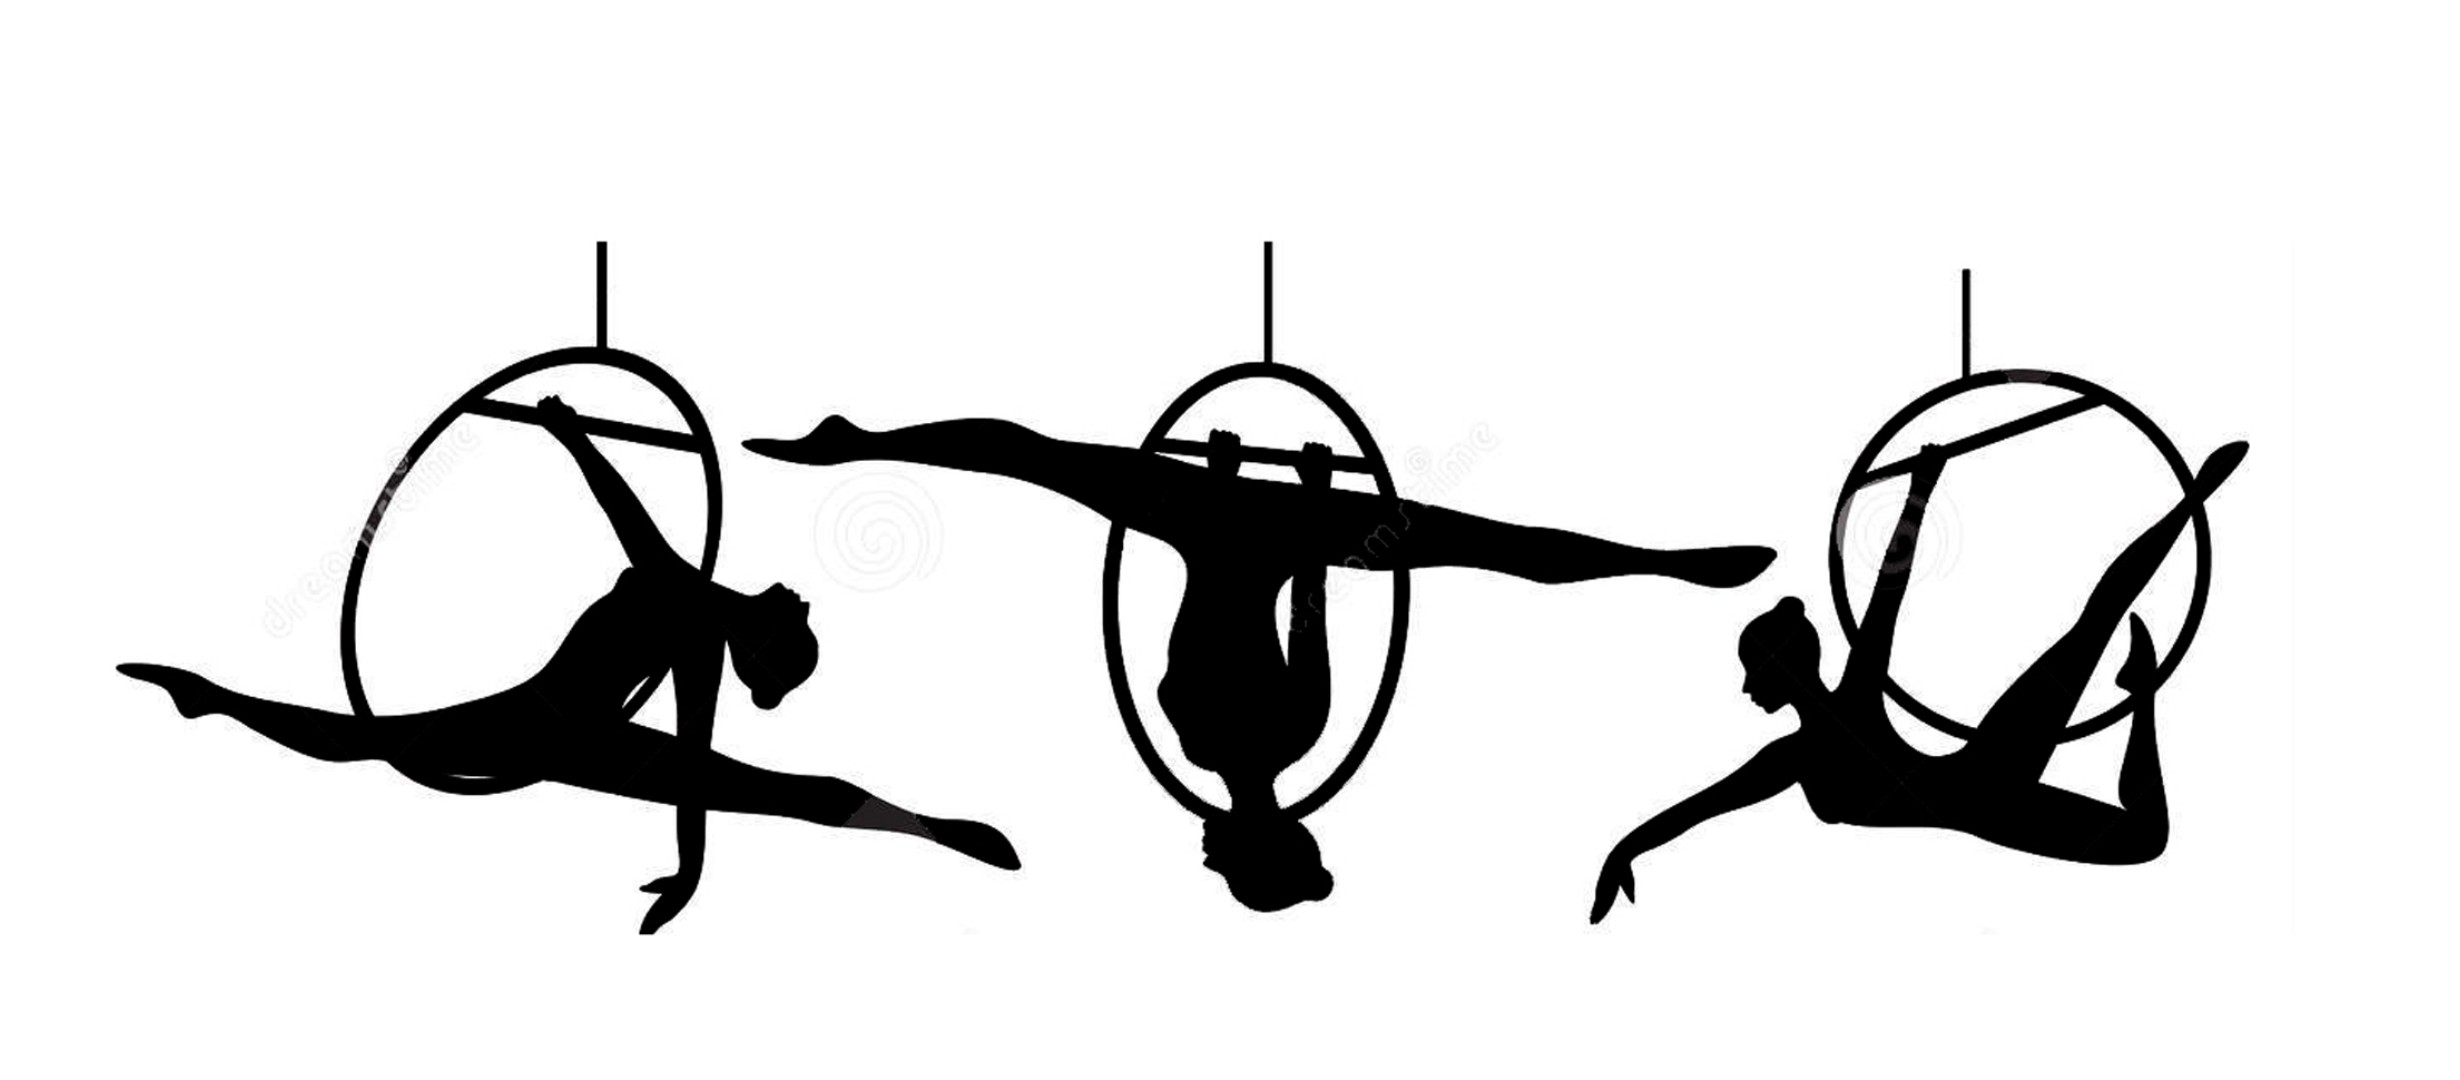 Silouttes of aerial performers using aerial hoops